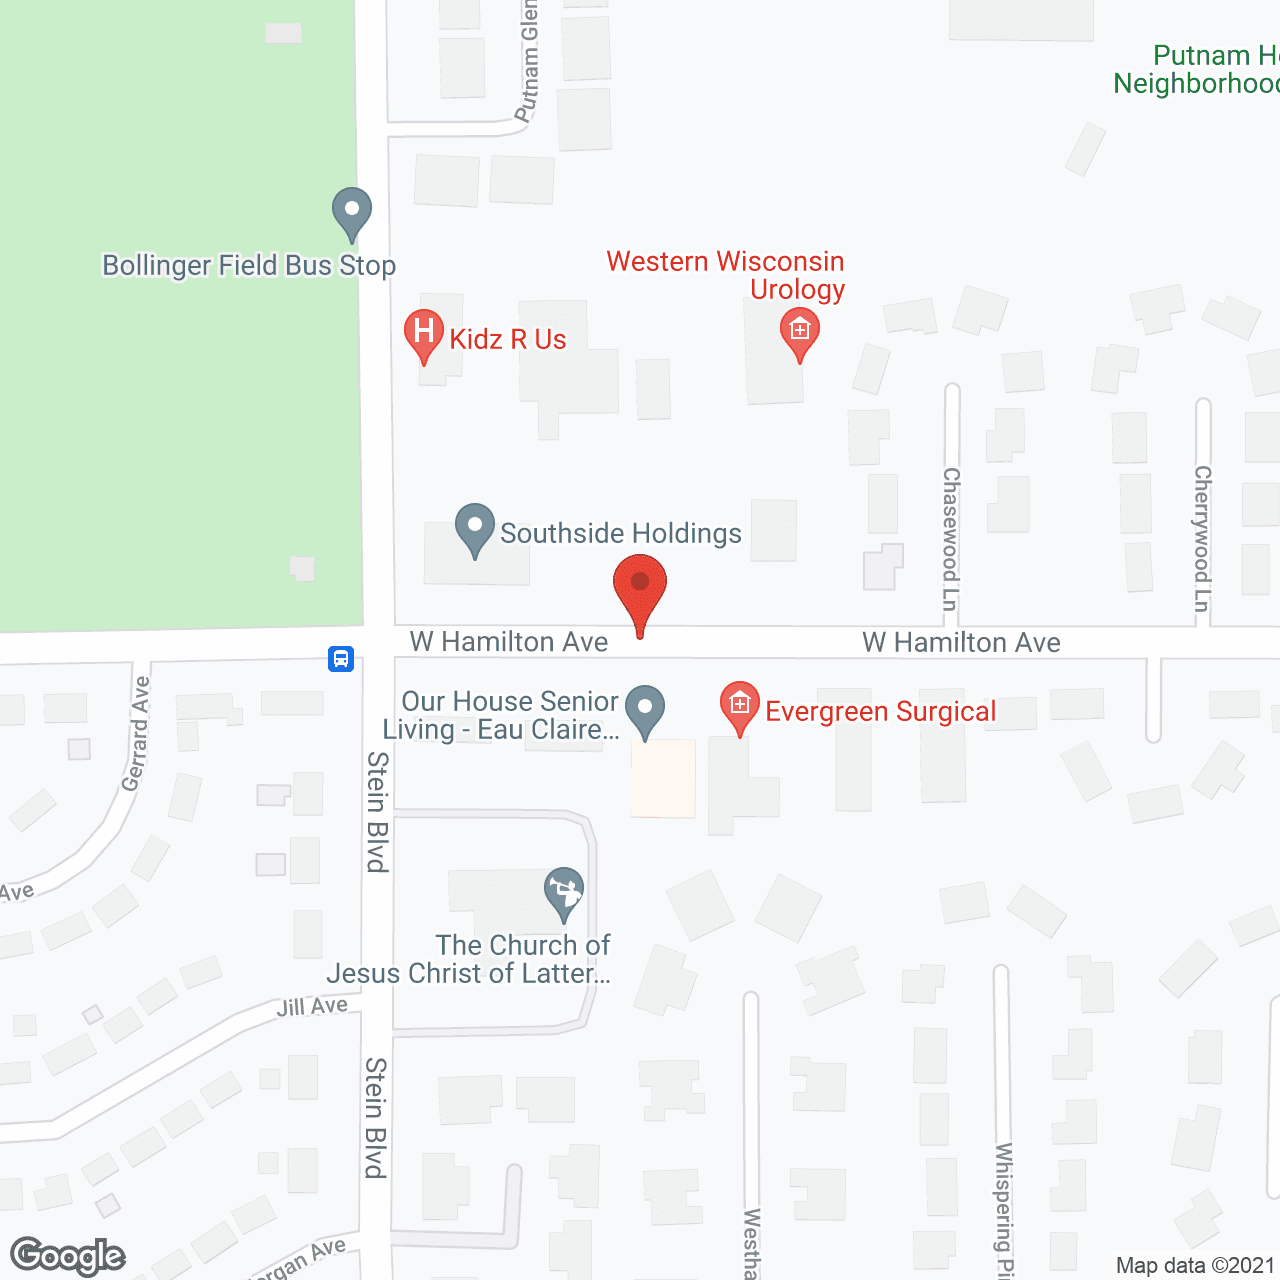 Our House Senior Living Memory Care - Eau Claire in google map